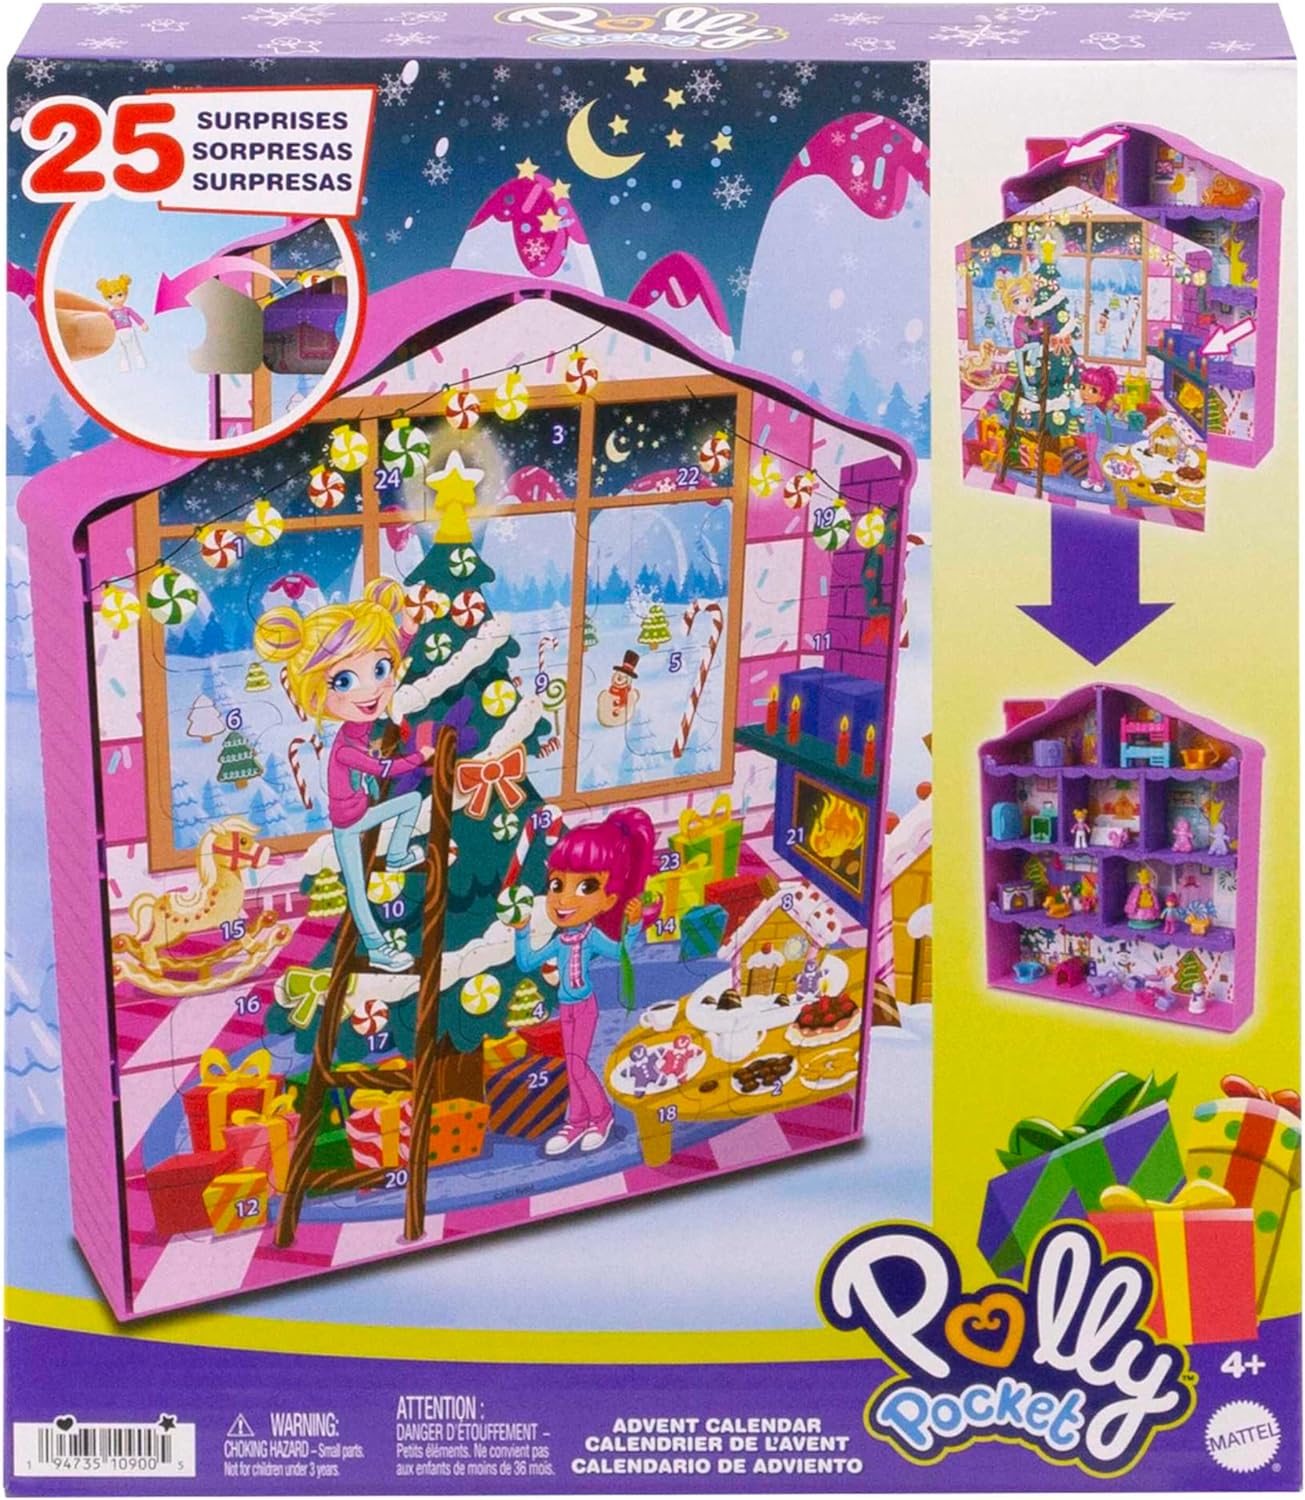 POLLY POCKET Advent Calendar House - 25 Surprises, 2 Dolls, 27 Accessories, Gingerbread House Design, Christmas Tree, Skis, for Children from 4 Years, HKW16